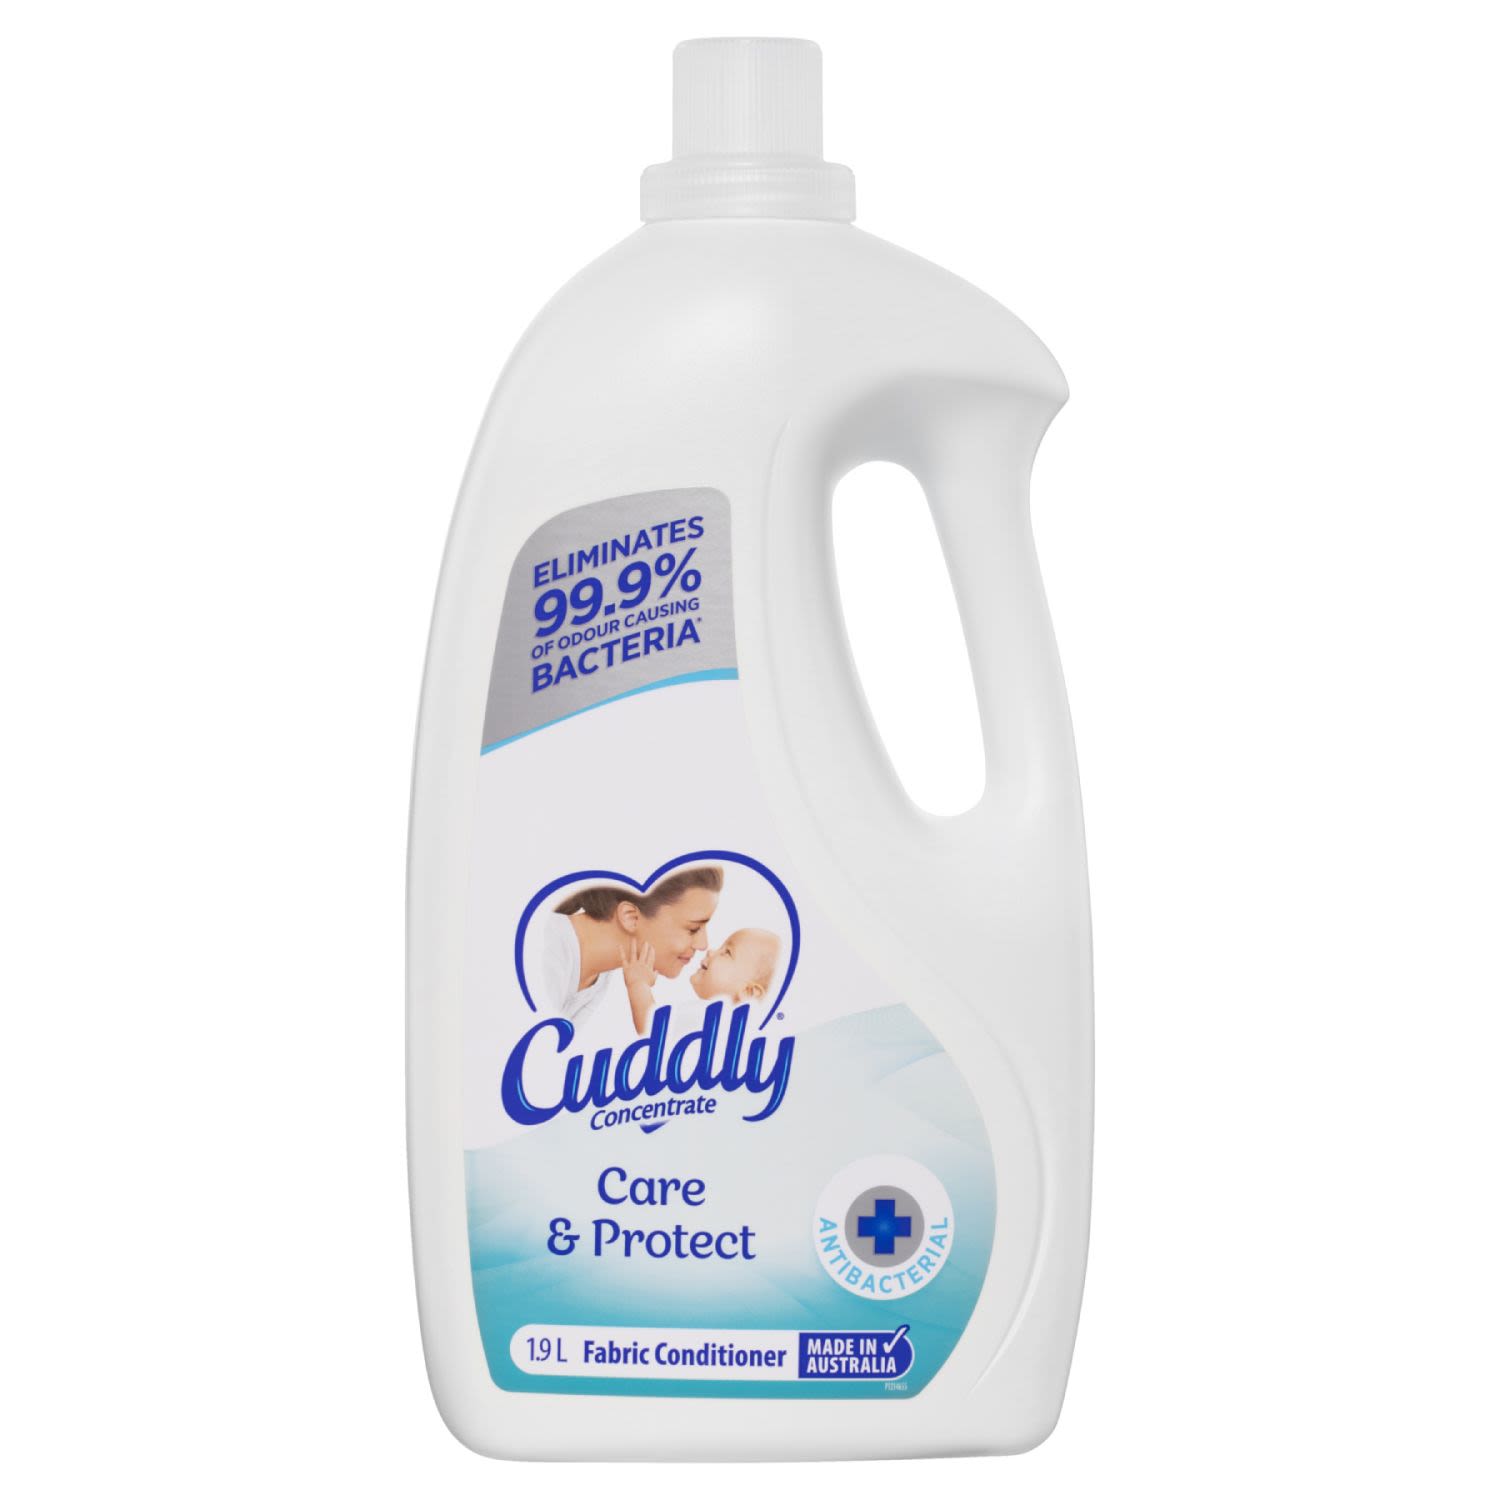 Cuddly Concentrate Fabric Softener Conditioner Care & Protect Antibacterial, 1.9 Litre